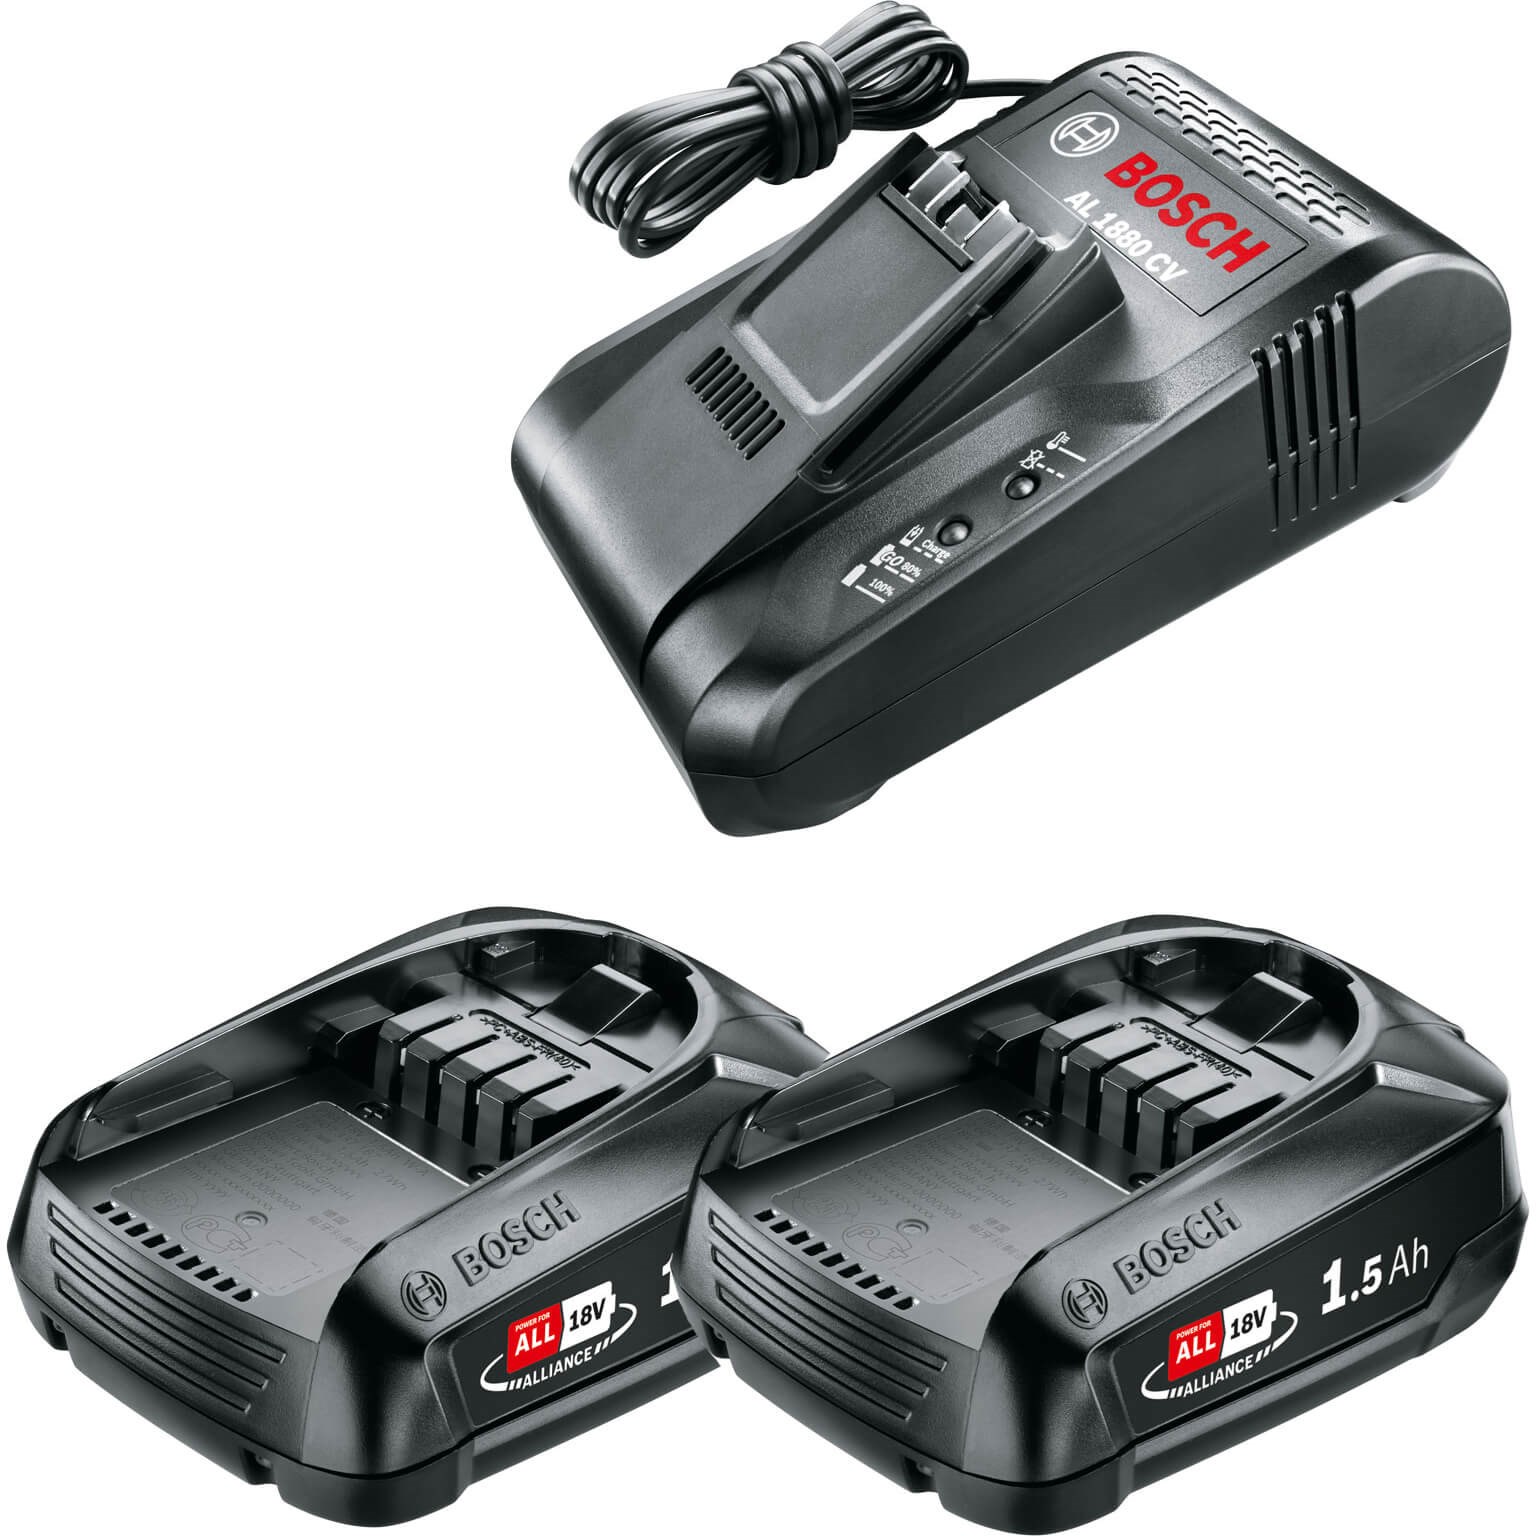 Bosch Genuine 8A | Charger Fast Battery 1.5ah Cordless Twin 18v GREEN Battery Chargers and Li-ion